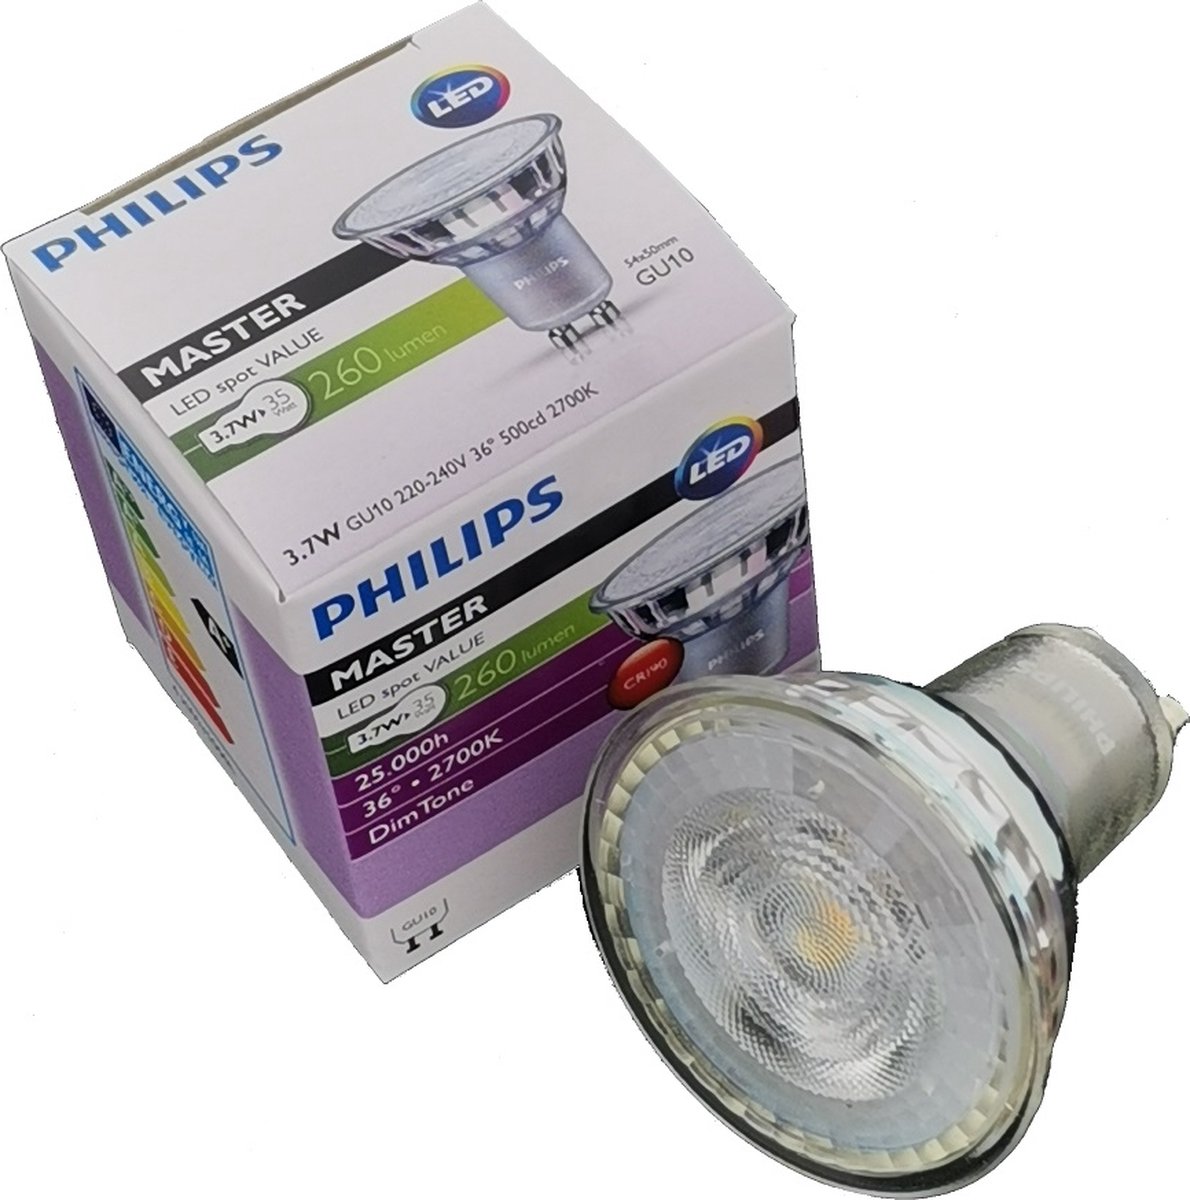 PHILIPS MASTER GU10 LED 6.2W LED -DIMMABLE (WARM or COOL)